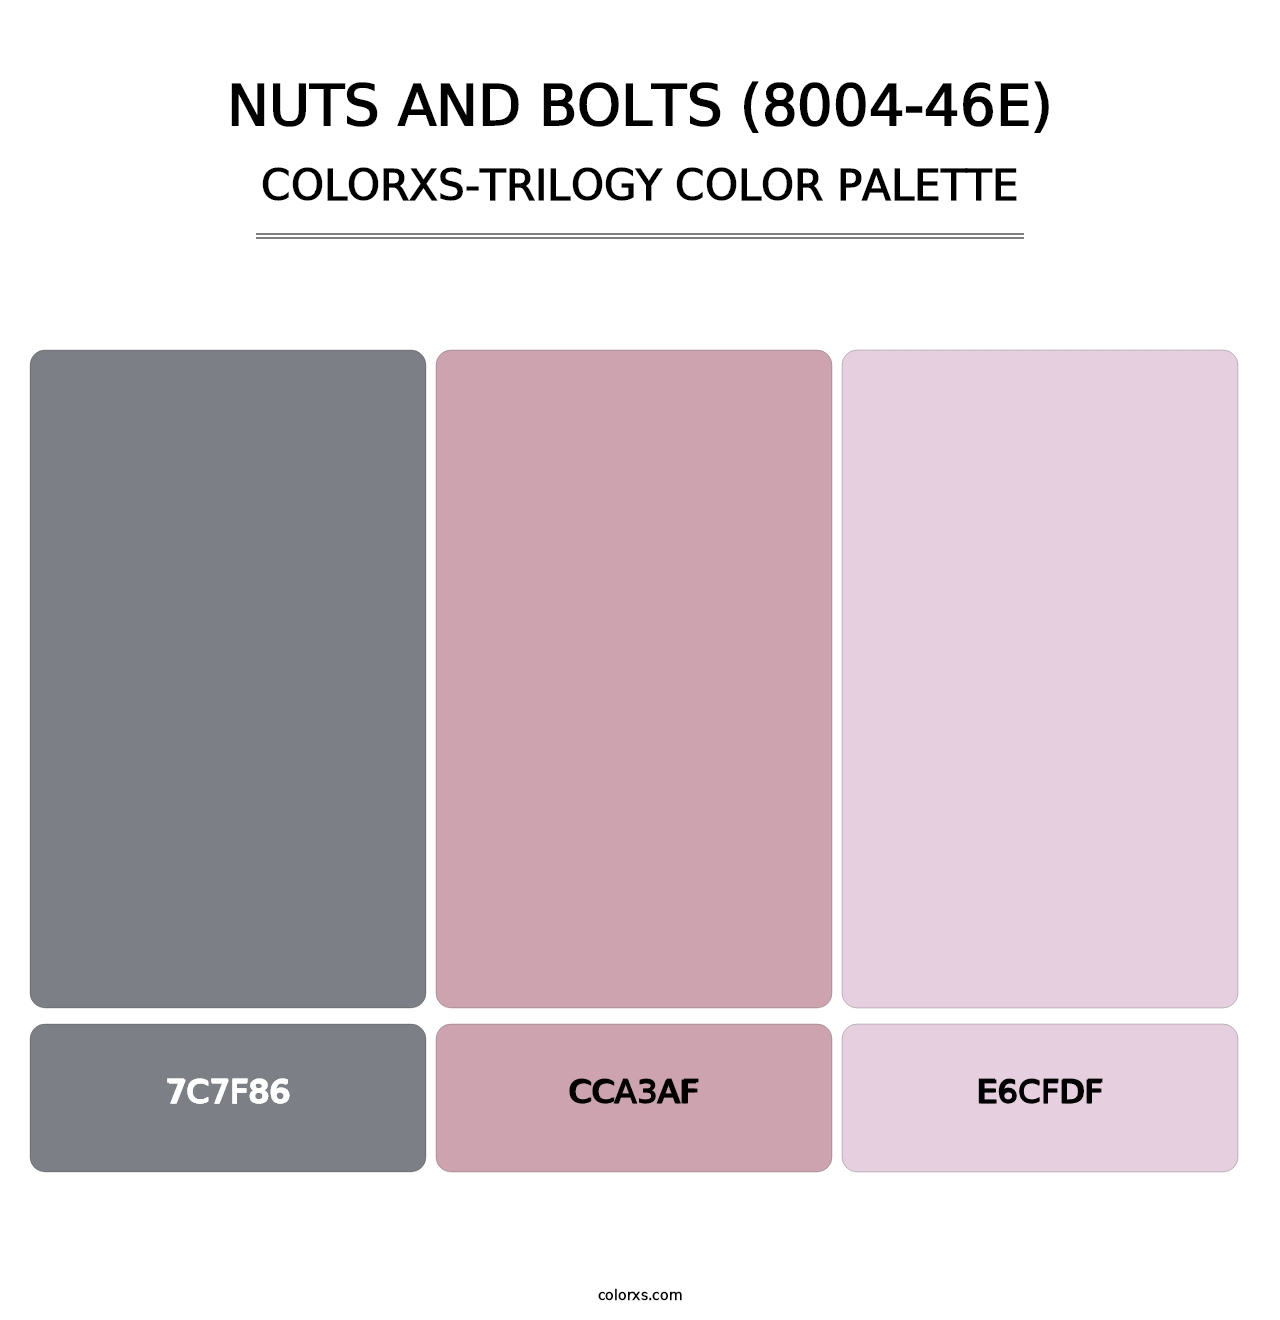 Nuts and Bolts (8004-46E) - Colorxs Trilogy Palette